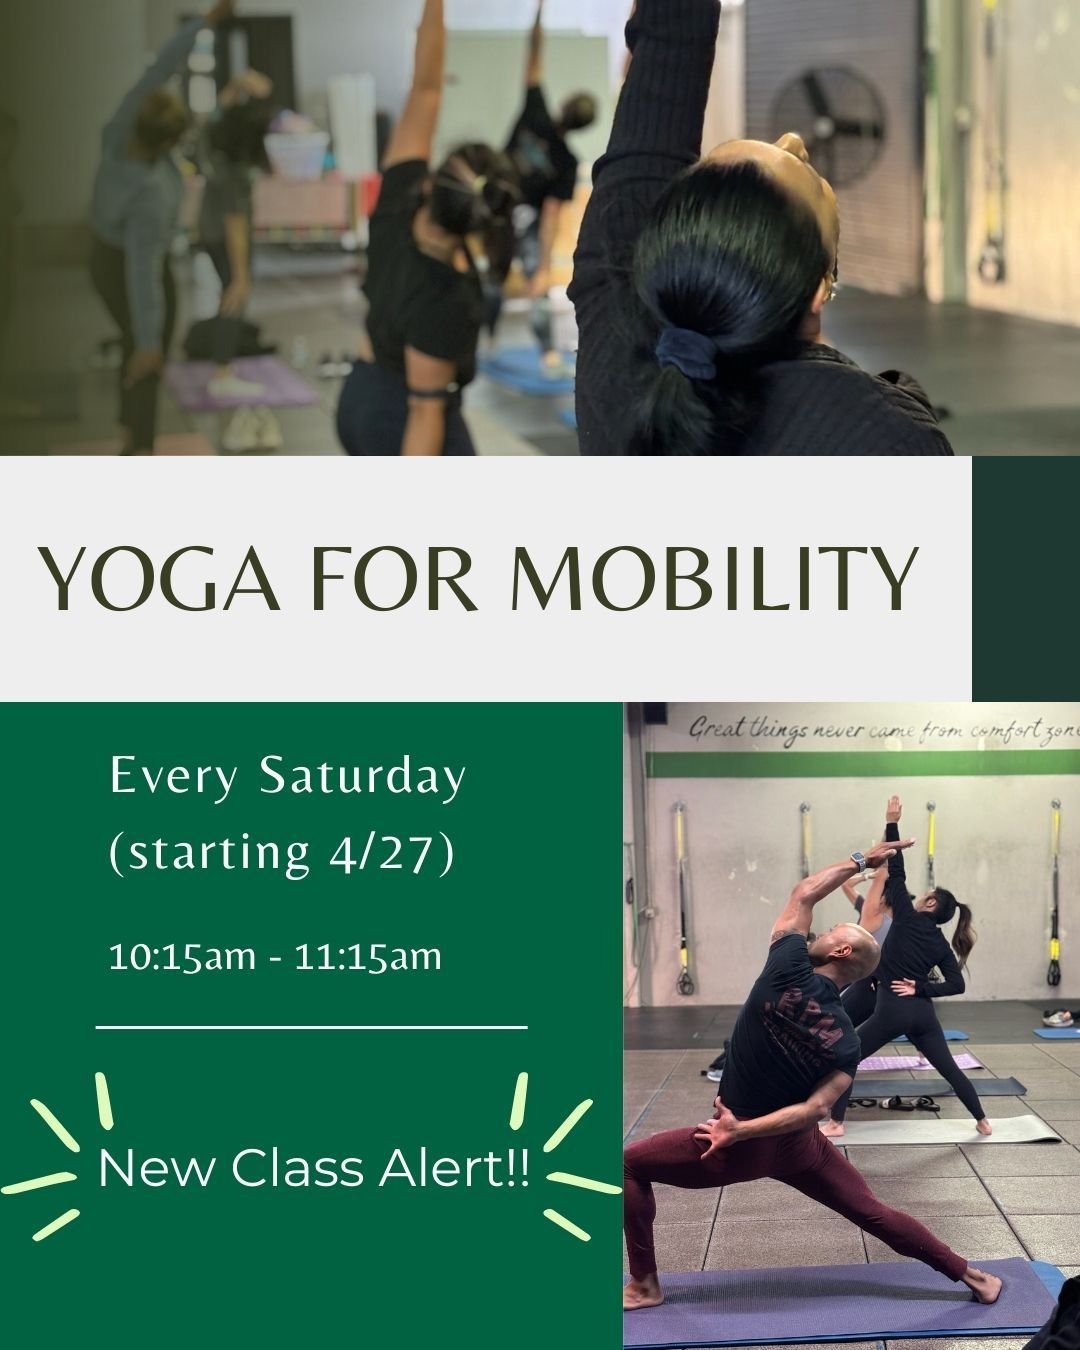 Attention!! New class alert!! Every Saturday at 10:15am, there will be a Yoga for Mobility Class with Instructor Sam Esver! This class will connect movement with breath. You will be guided through a sequence of poses that will help improve balance, c